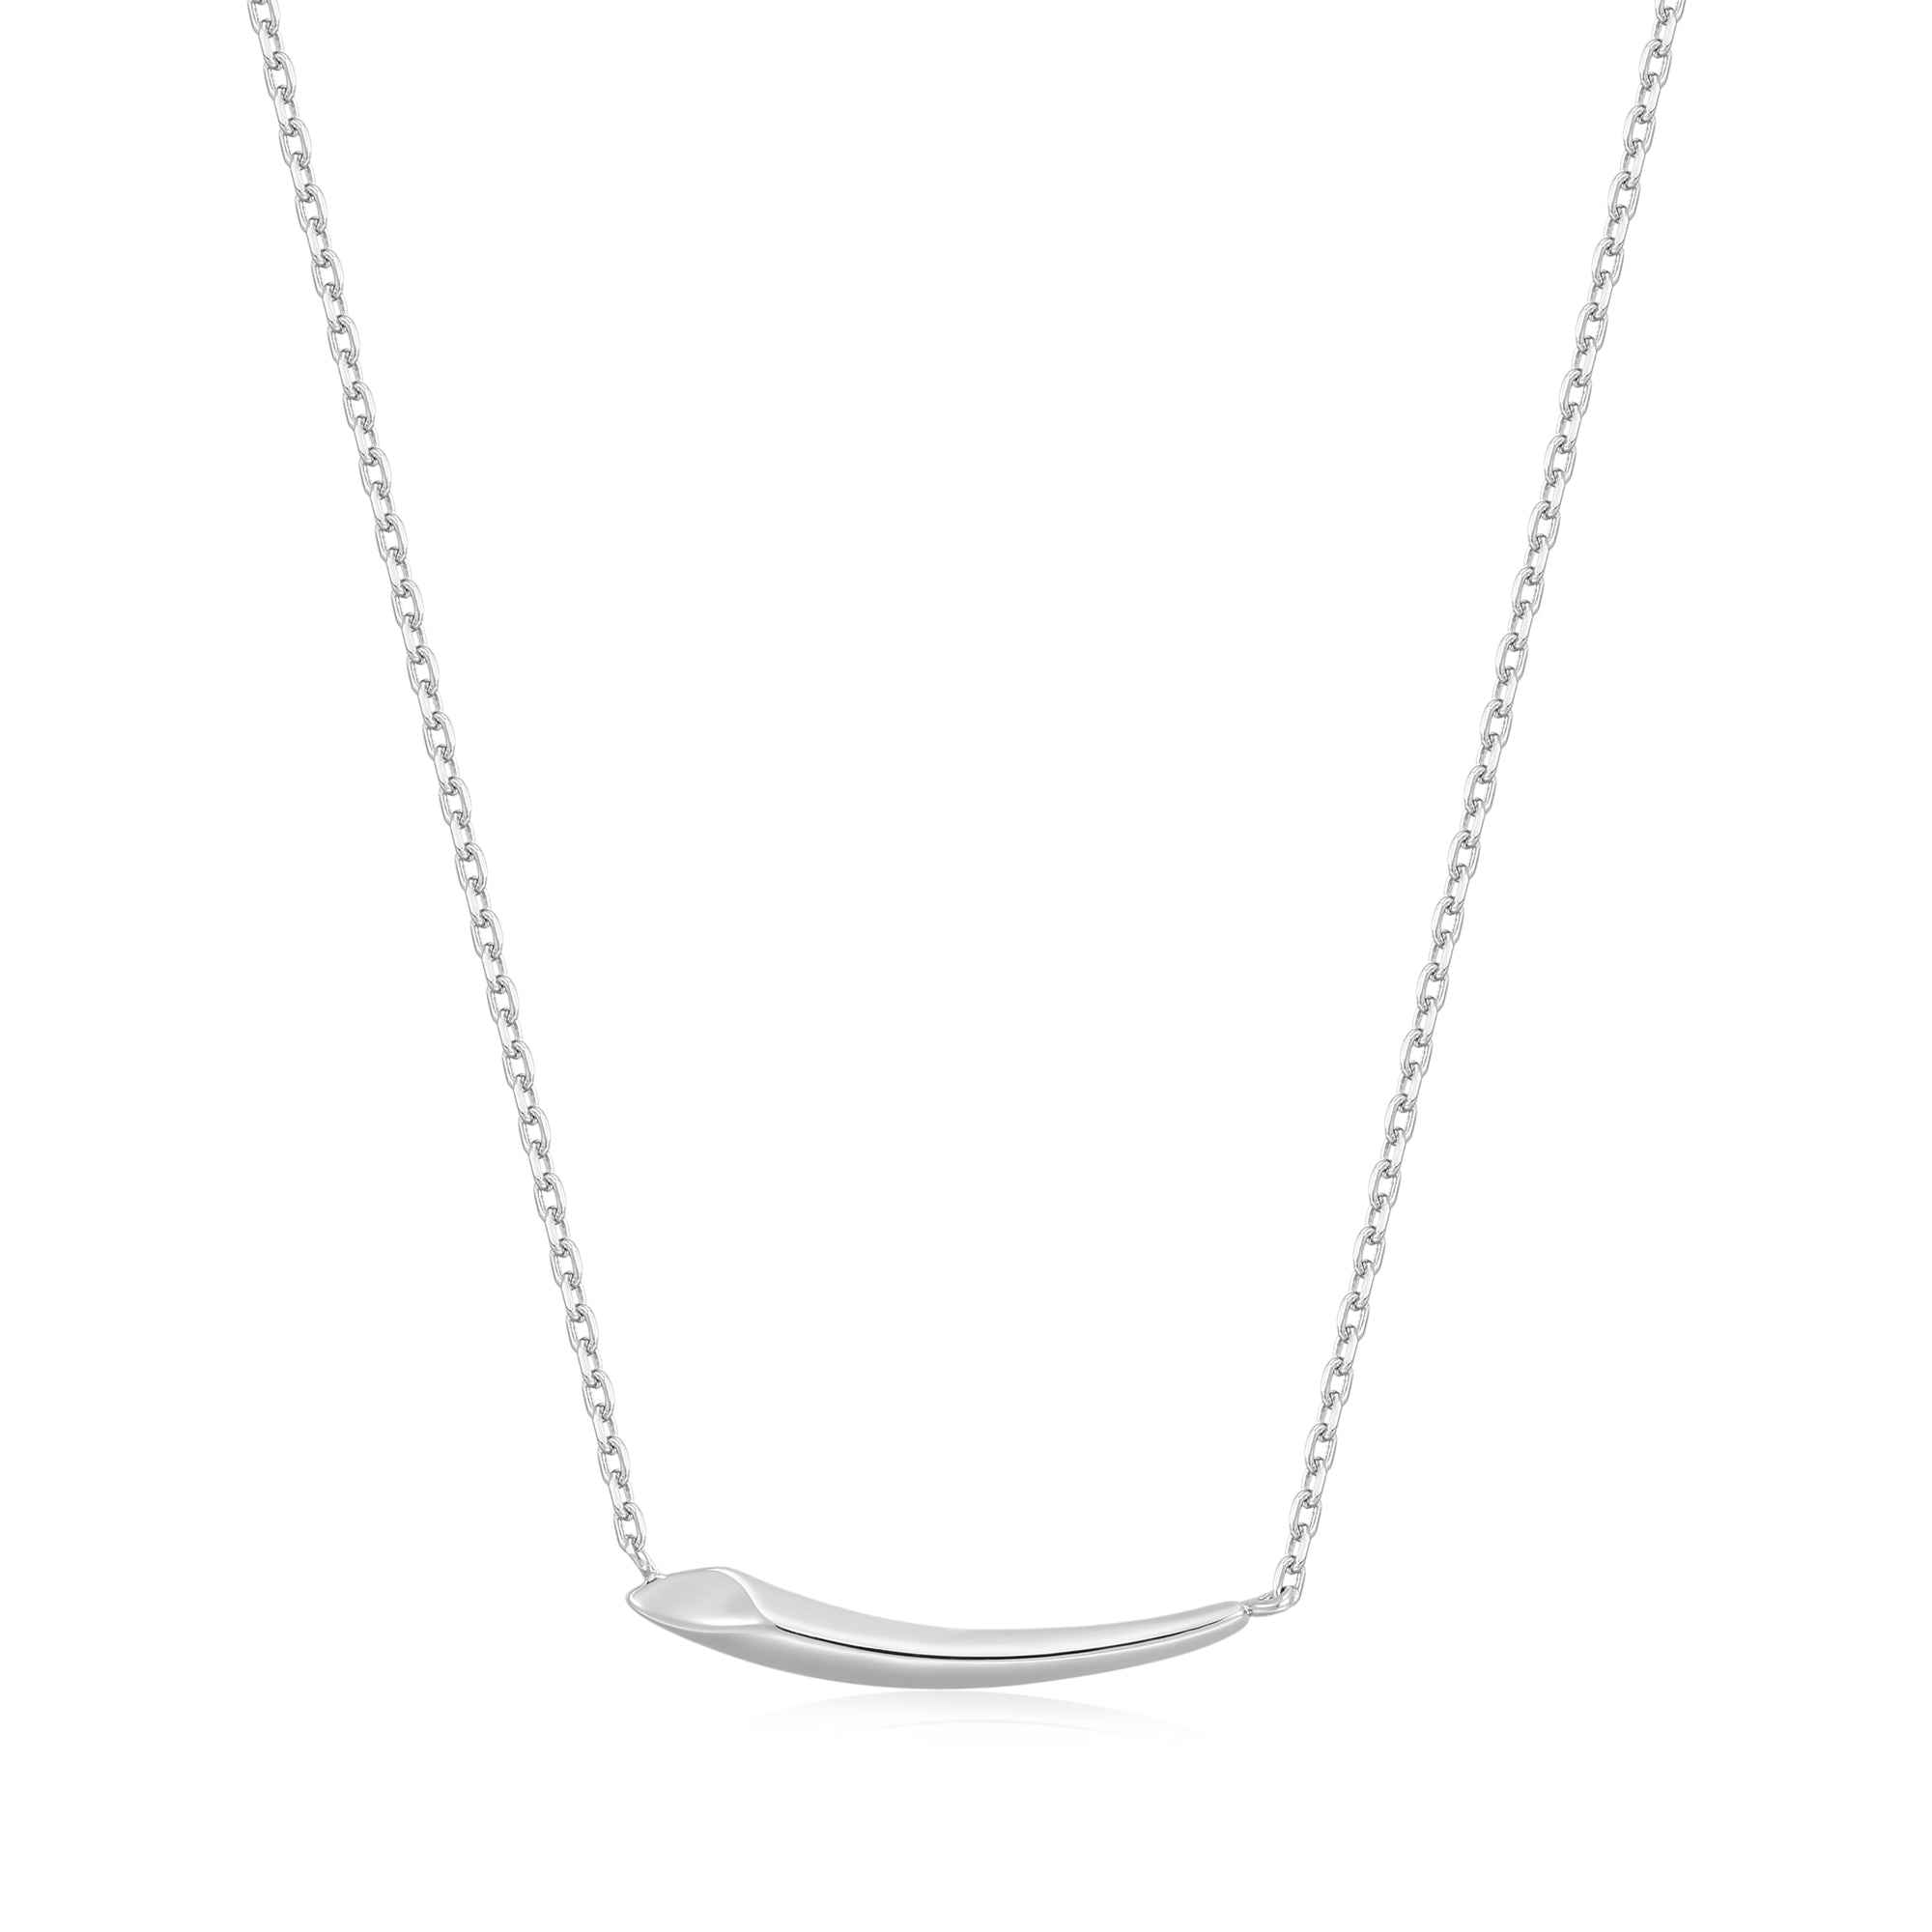 Ania Haie Sterling Silver Padlock Necklace